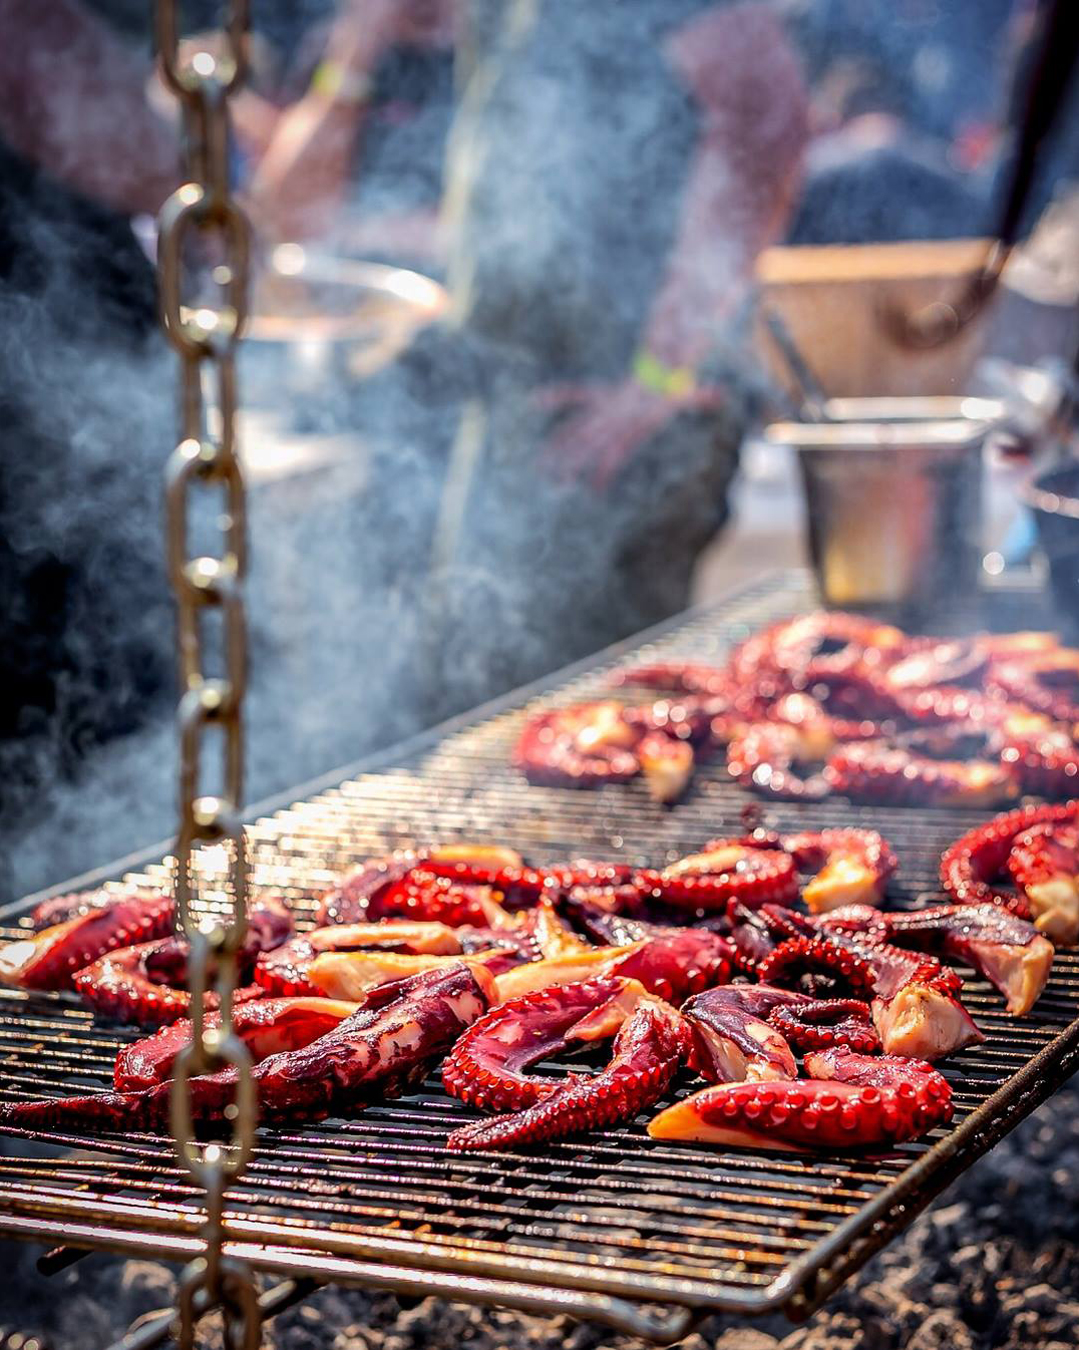 calamari being cooked over grill